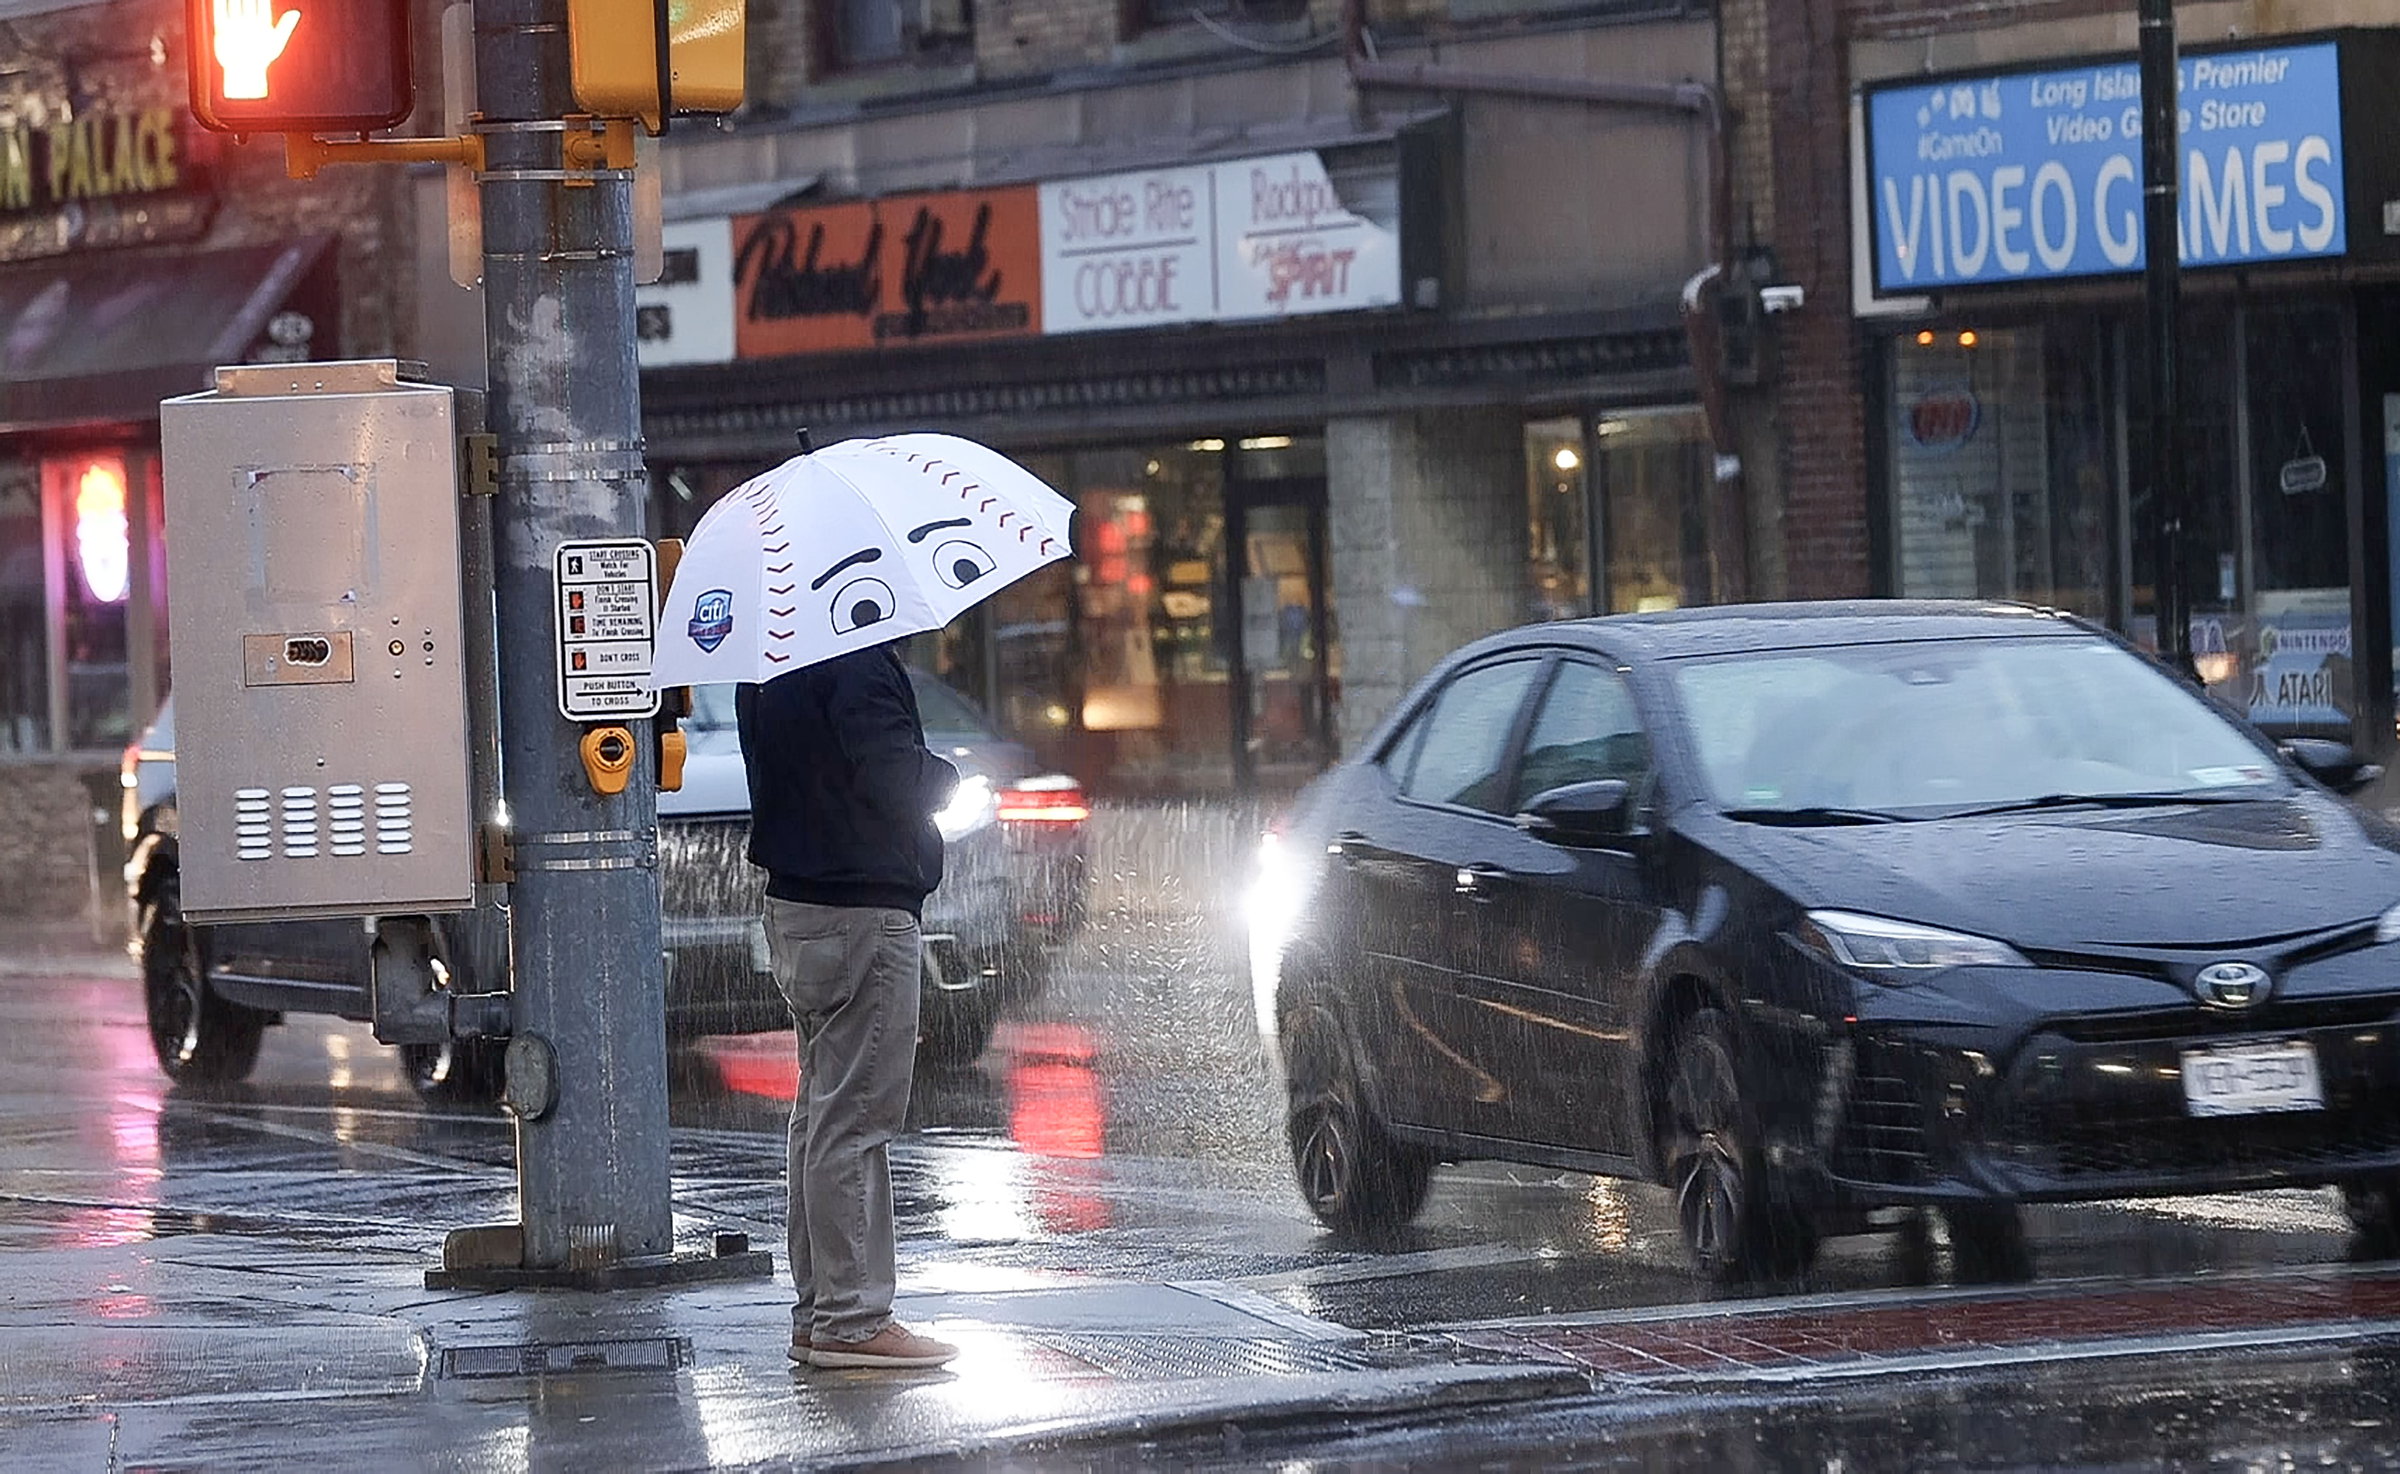 A stock image of someone in the rain on a city street corner.